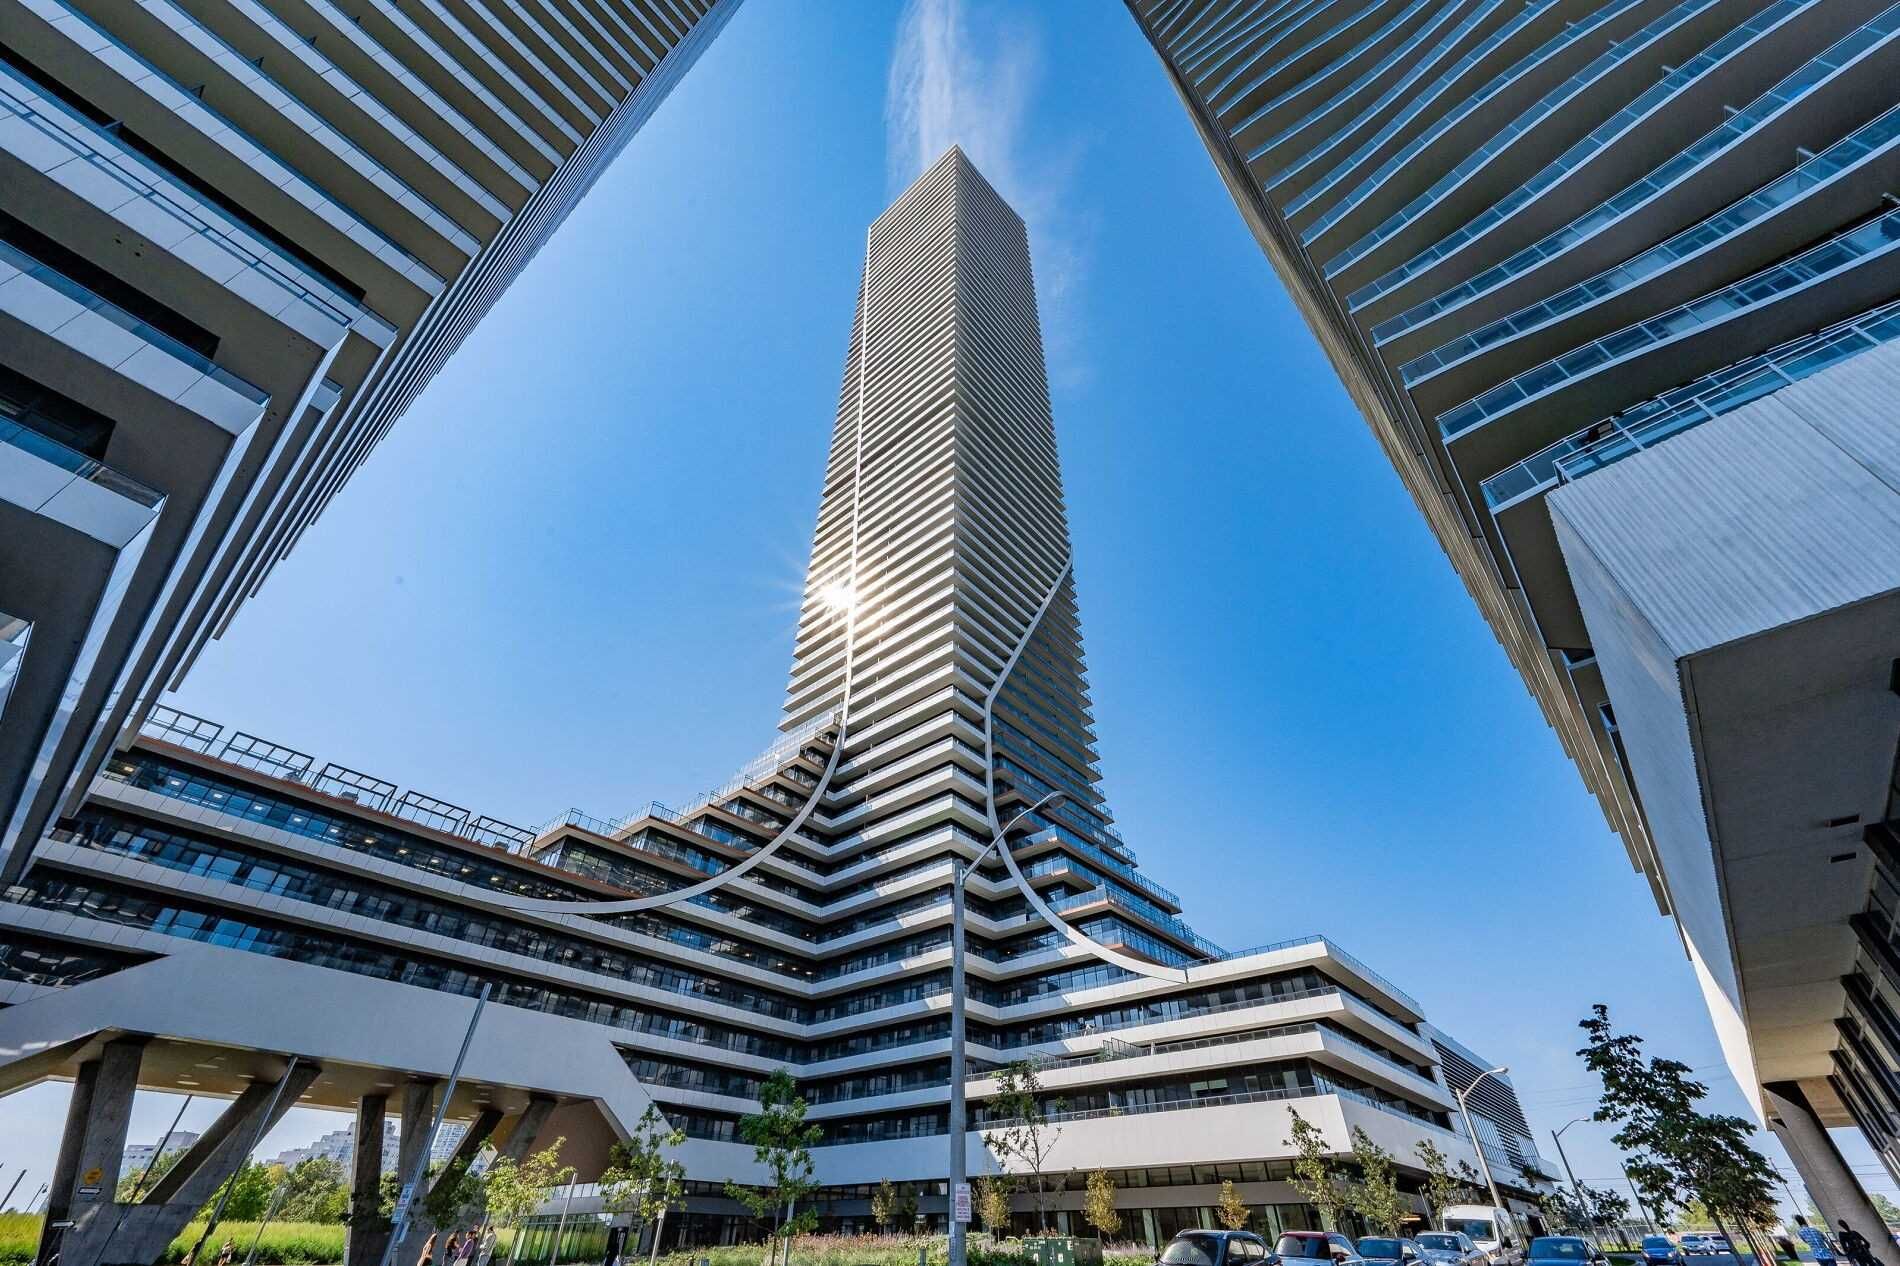 2183 Lake Shore Blvd W. This condo at Sky Tower at Eau Du Soleil Condos is located in  Etobicoke, Toronto - image #3 of 3 by Strata.ca